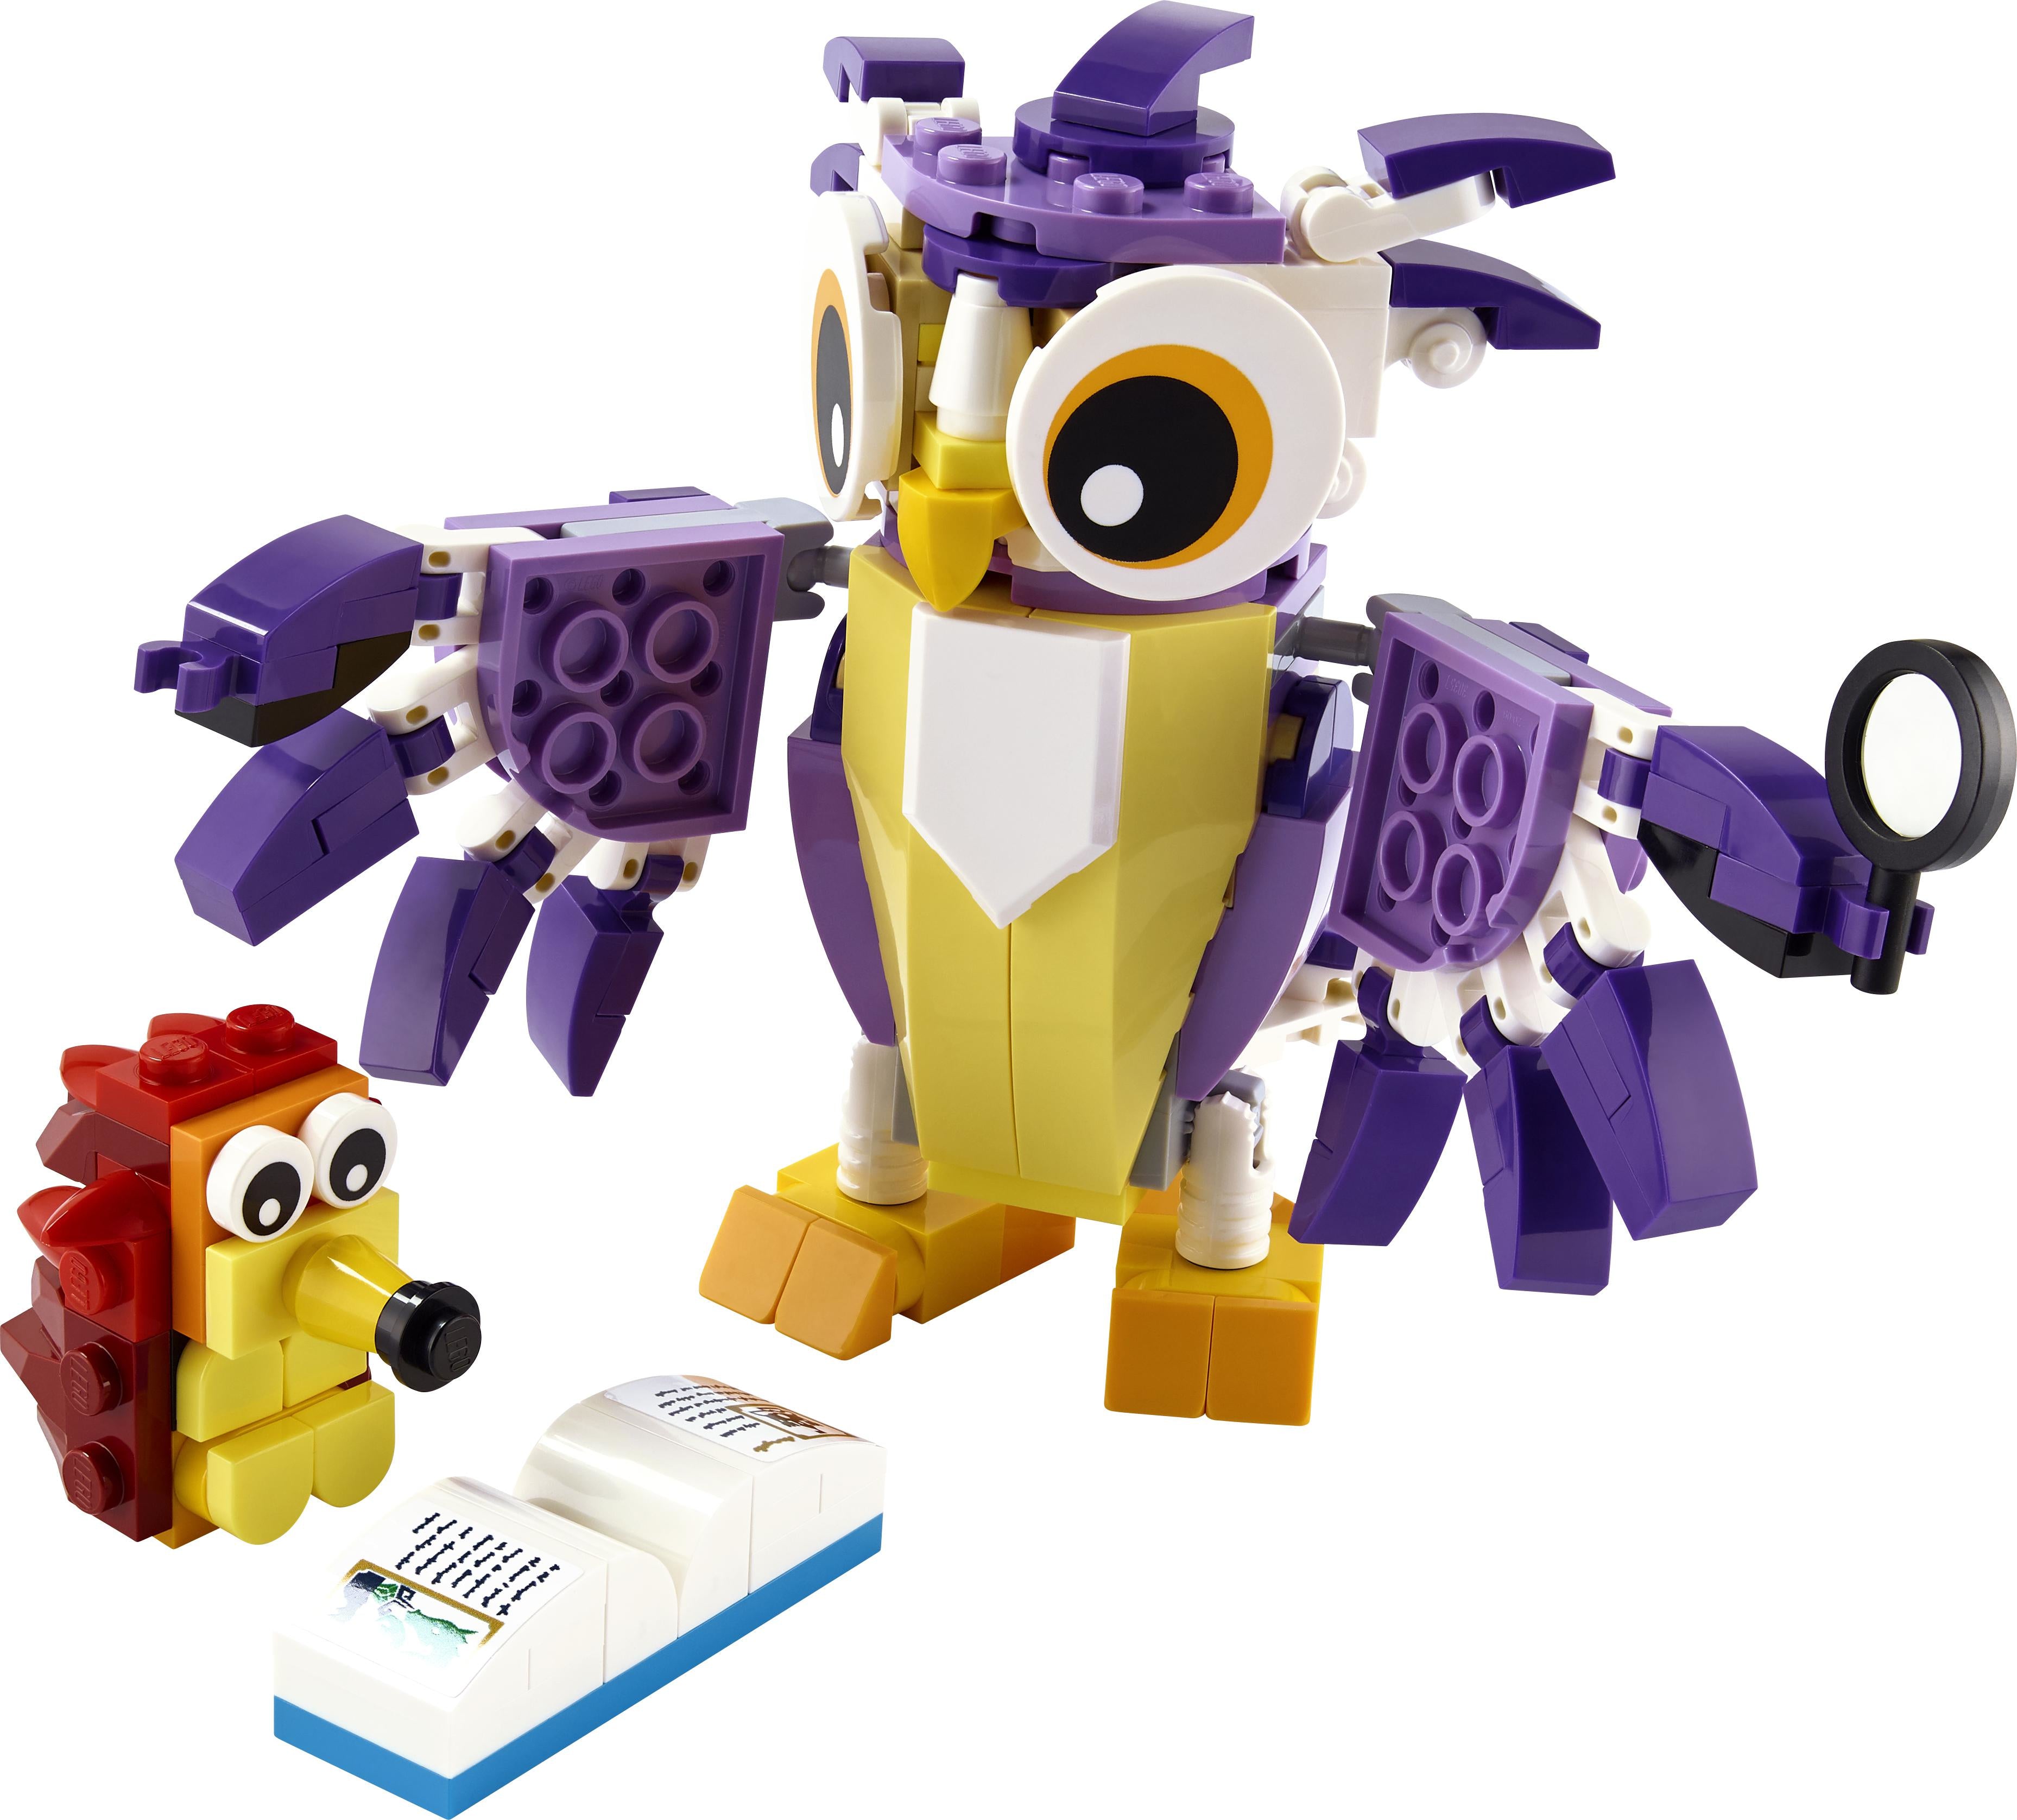 LEGO 31125 Creator 3in1 Fantasy Forest Creatures - Rabbit to Owl to Squirrel Brick Built Figures, Woodland Animal Toys Set for Kids